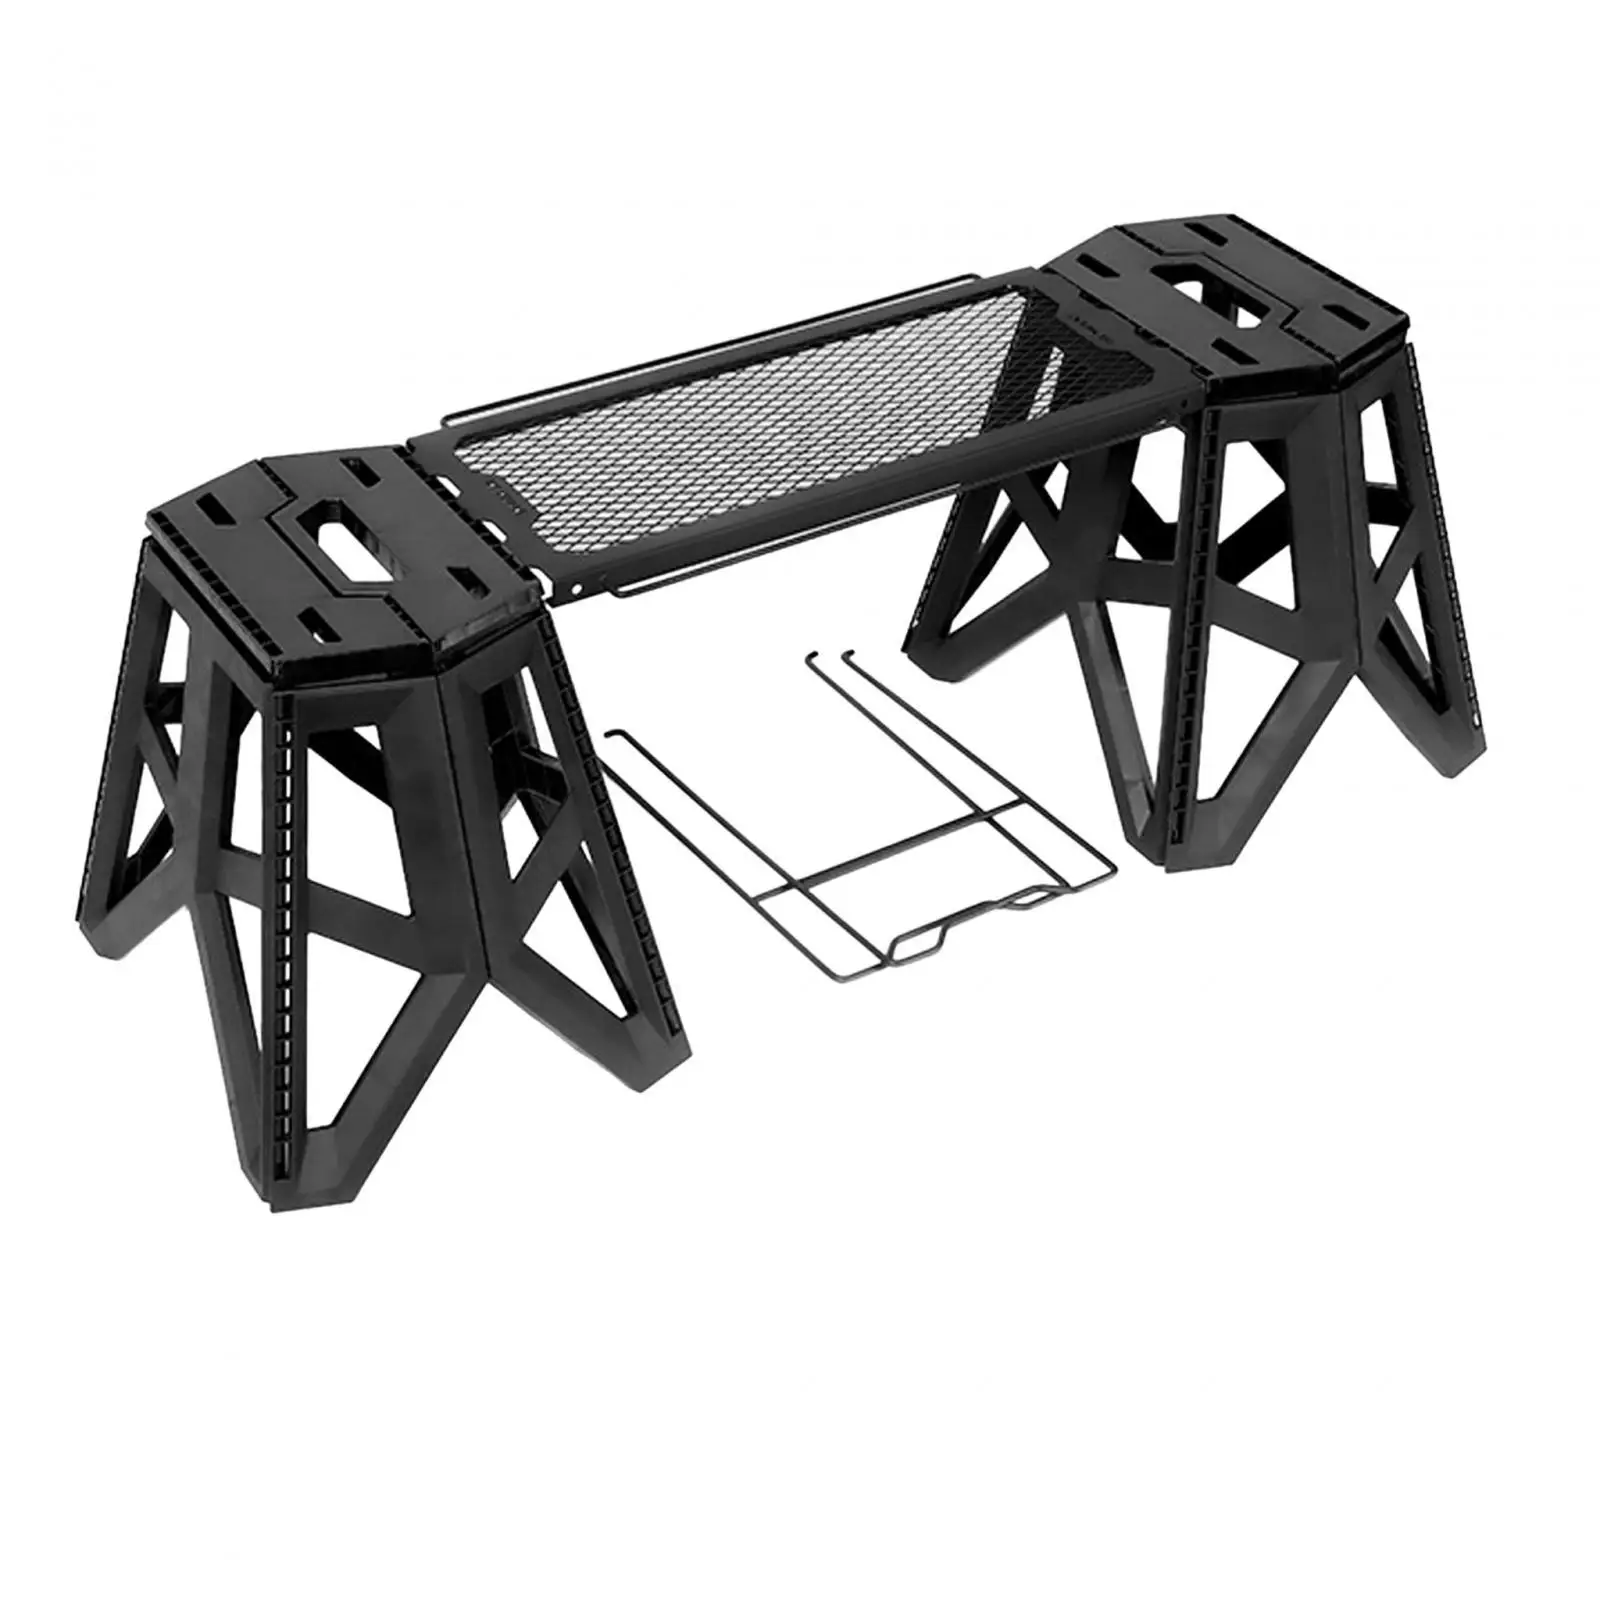 Camping Table and Stool Set Outdoor Table and Stools Side Hanging Table Folding Table Small for Cooking Hiking Beach BBQ Picnic